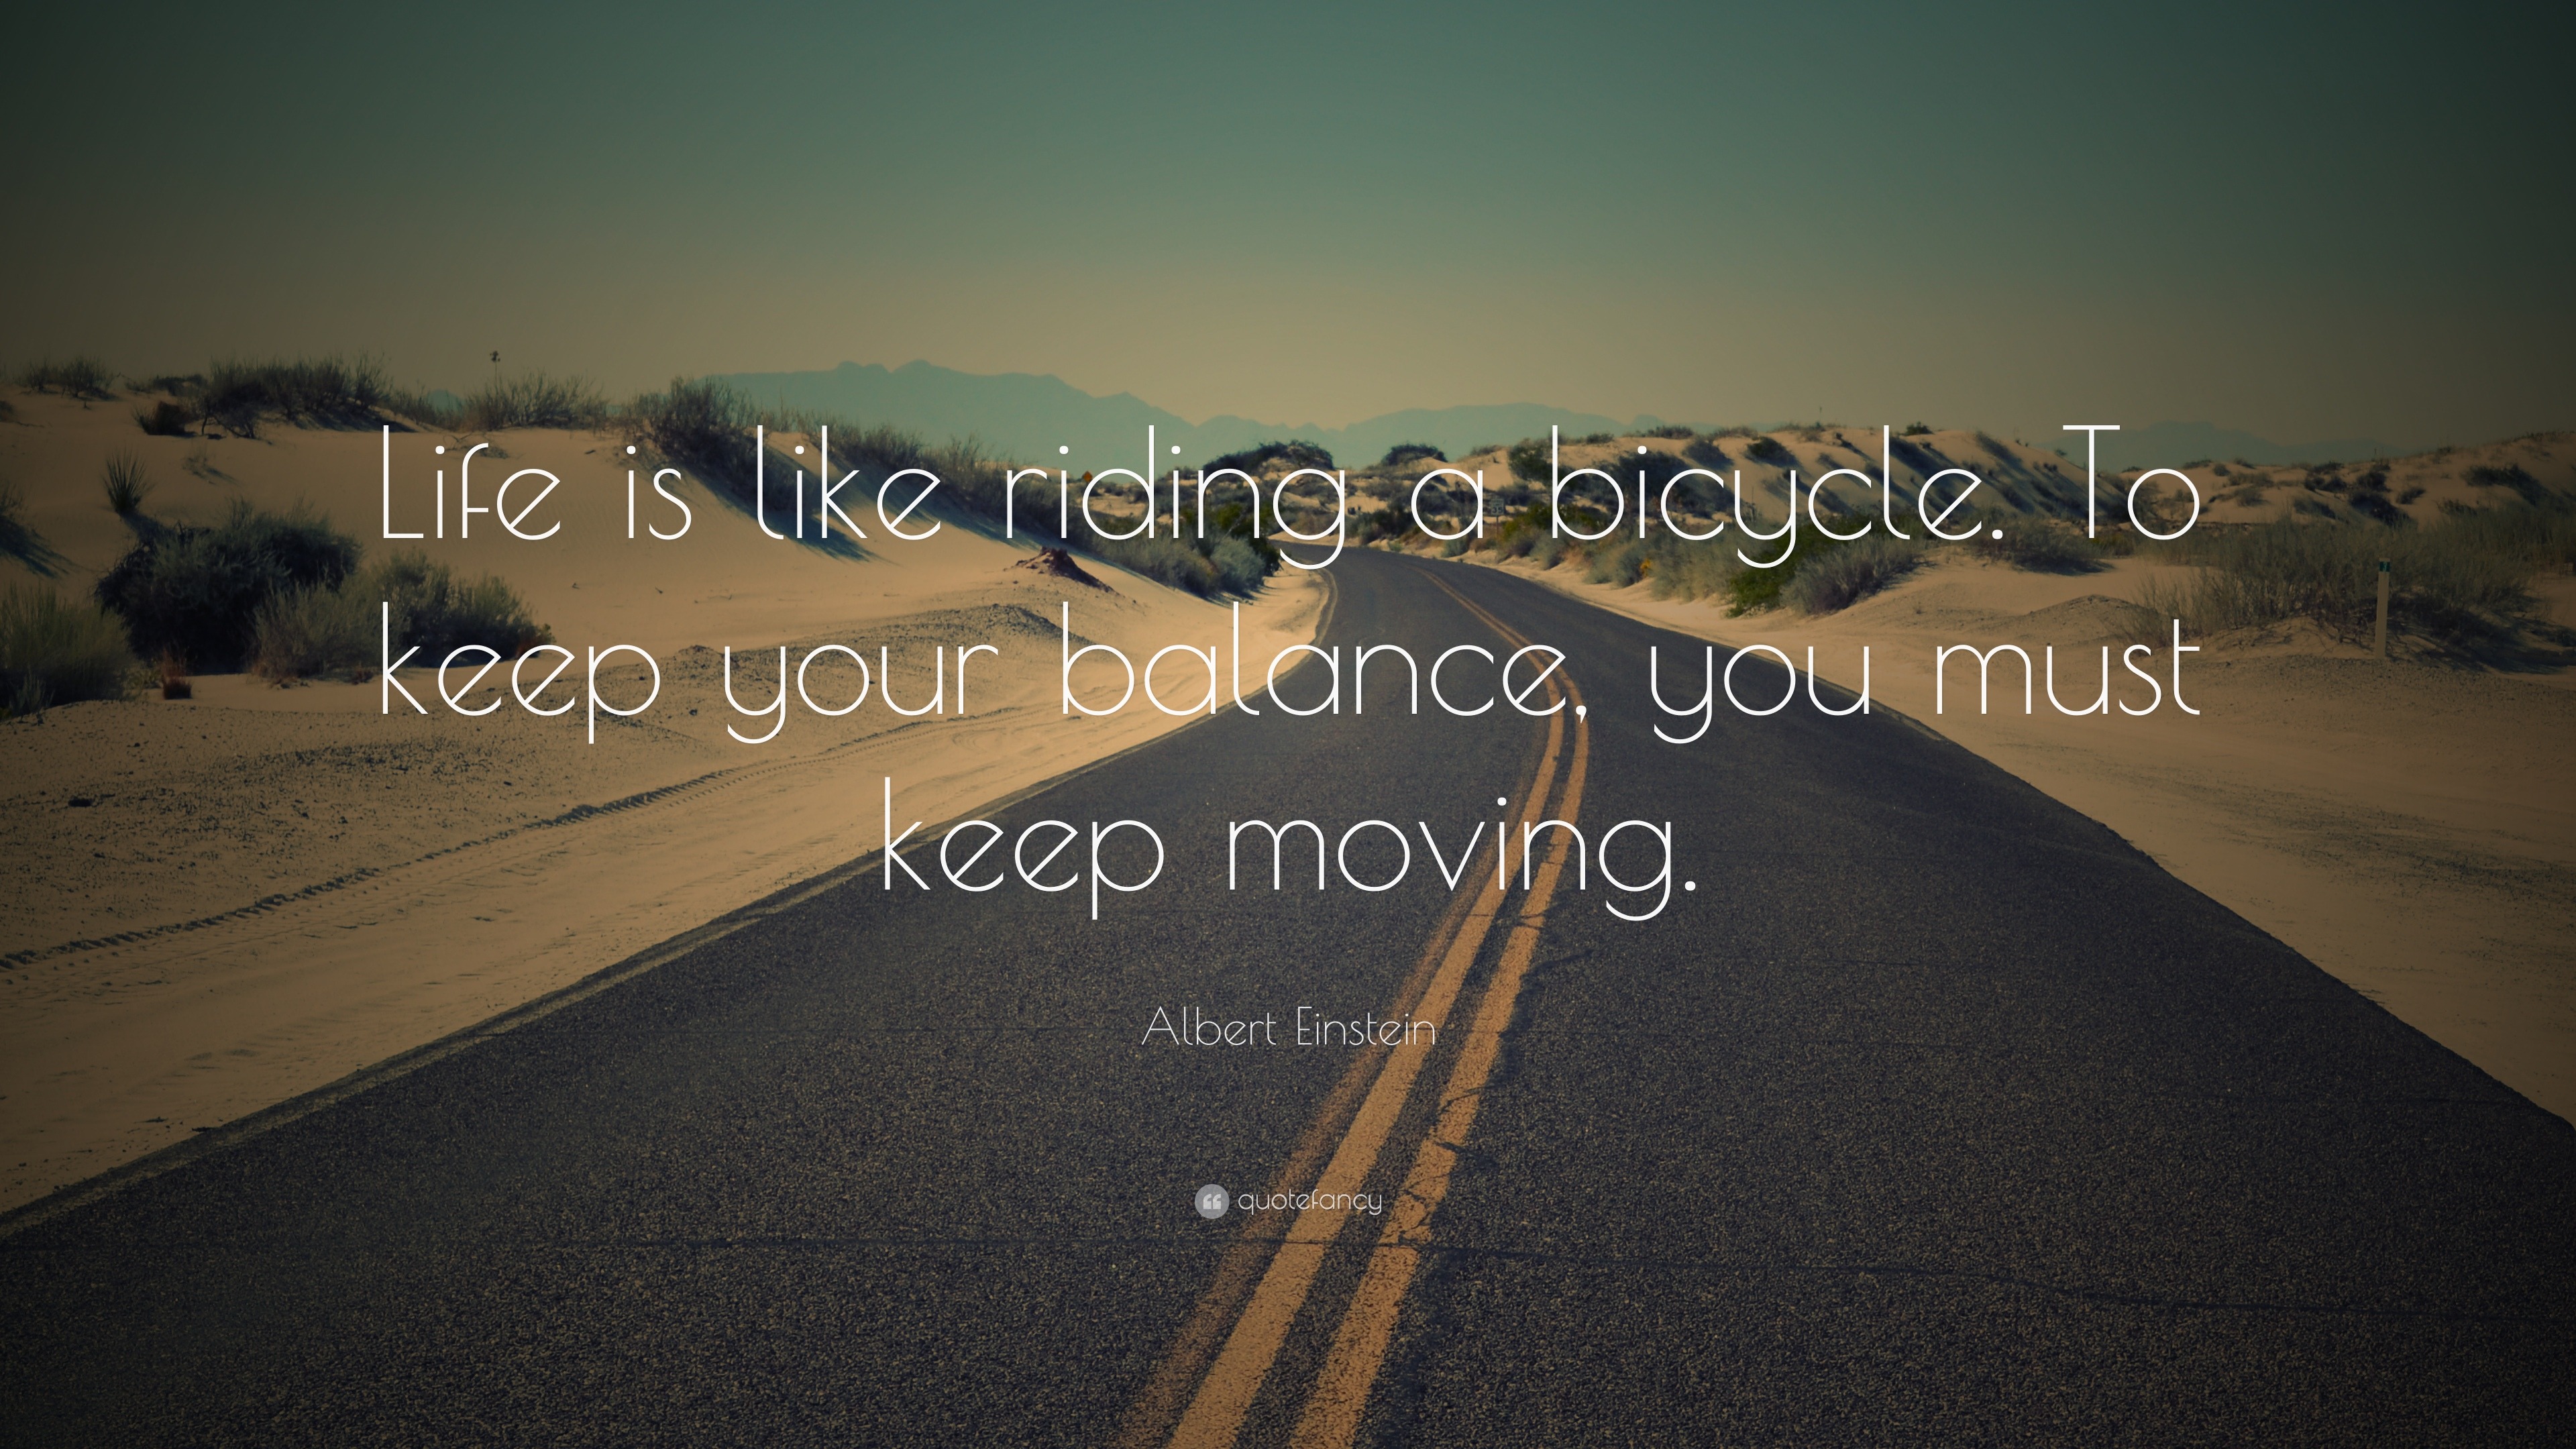 Albert Einstein Quote “Life is like riding a bicycle To keep your balance